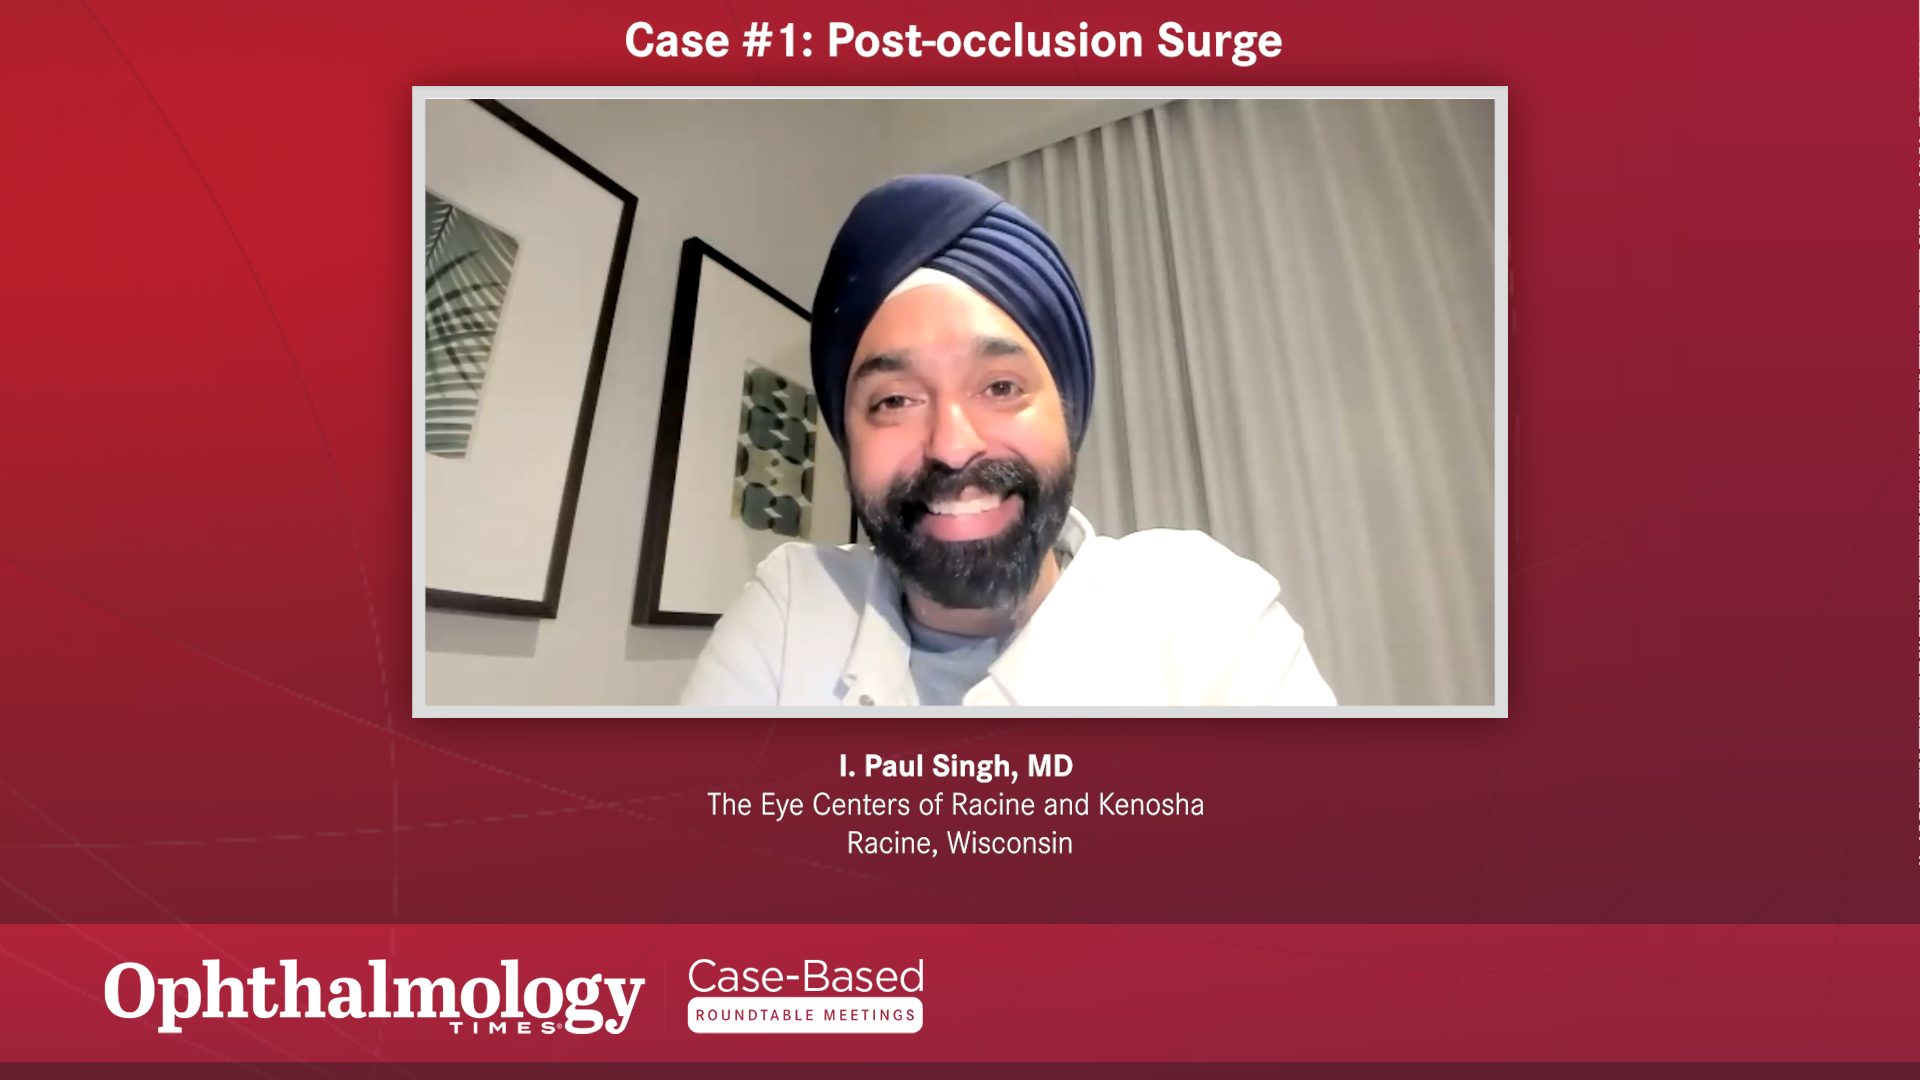 Advanced Techniques for Optimizing Surgical Outcomes in Phacoemulsification